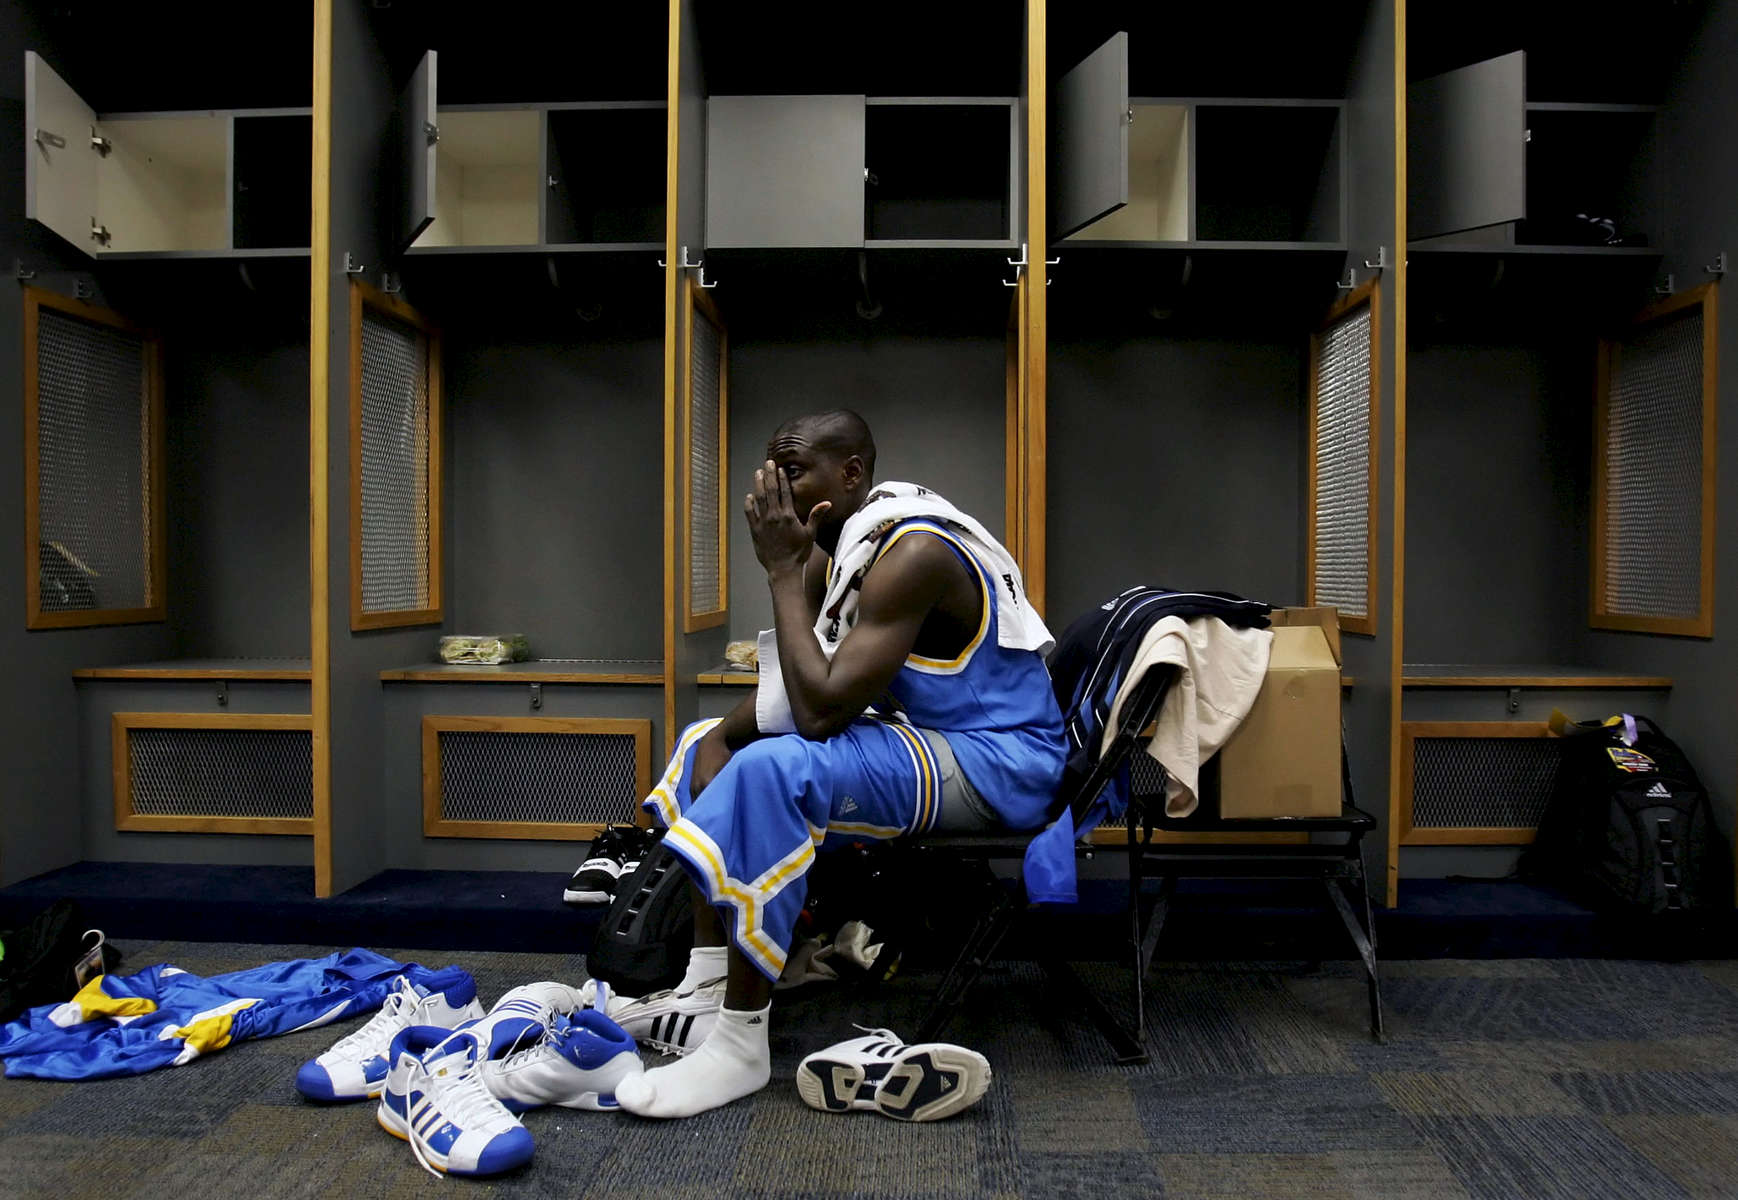 UCLA's Darren Collison sits alone in the locker room after losing to the University of Memphis during the 2008 NCAA Division I Men's Final Four at theAlamodome in San Antonio, Texas. Memphis beat UCLA 78-63. (The Press-Enterprise/ Mark Zaleski)